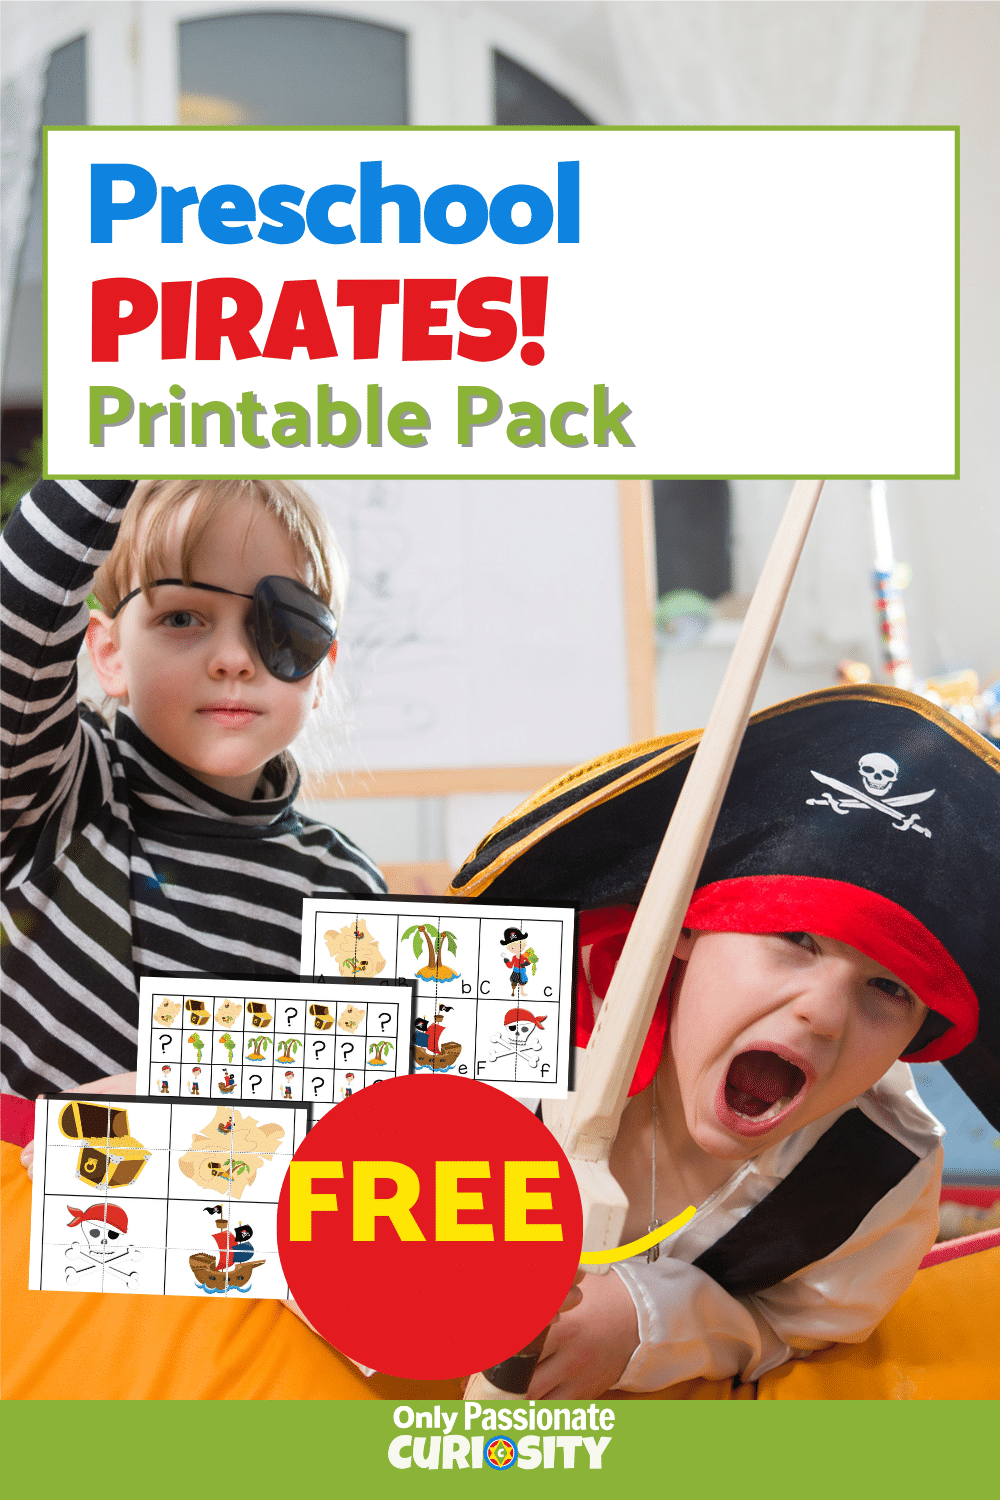 Got little pirates at your house? This fun printable pack is for them! It includes 20 activity pages with activities such as number sequencing, matching pictures, simple puzzles, tracing lines, patterns, ordering sizes, matching uppercase and lowercase letters, coloring pages, number recognition and 1:1 ratio, and even a pirate-themed tic-tac-toe game!